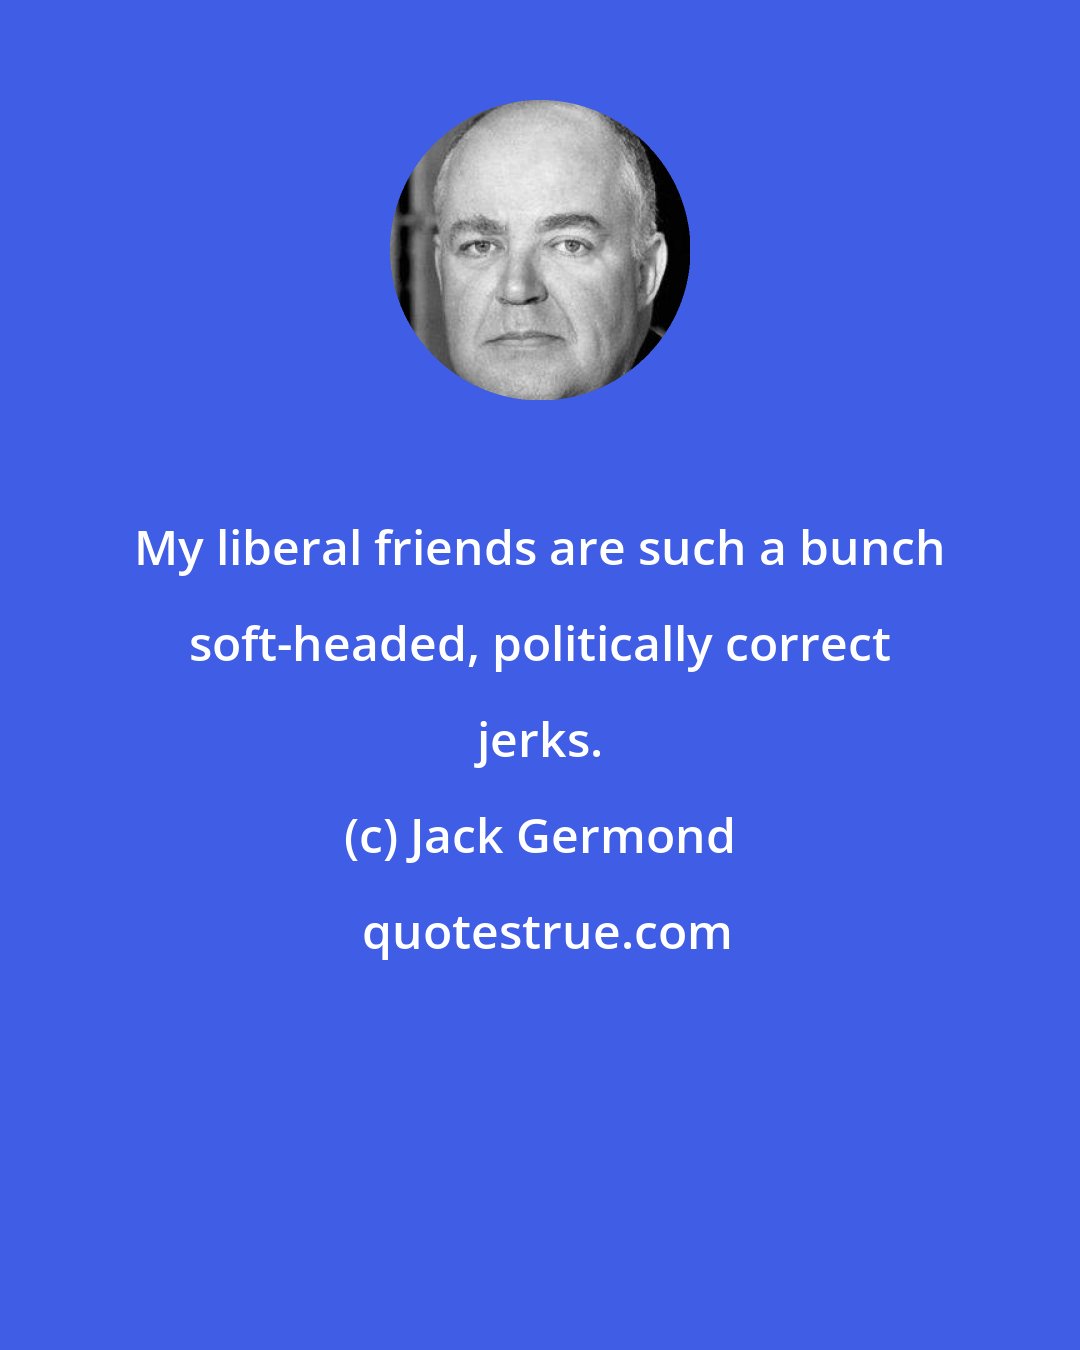 Jack Germond: My liberal friends are such a bunch soft-headed, politically correct jerks.